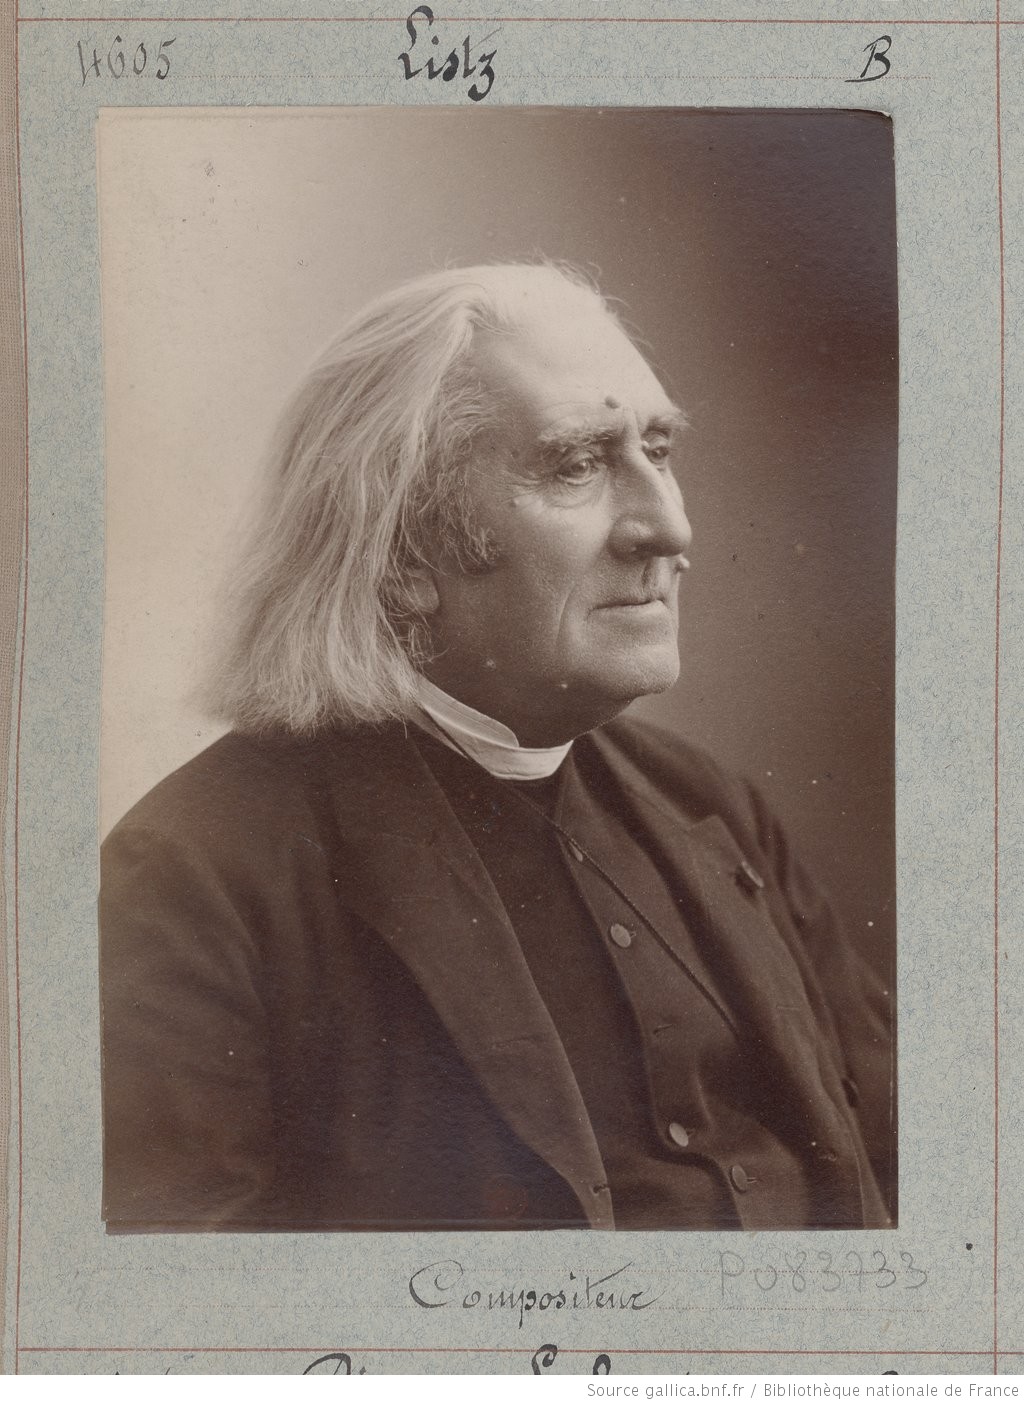 Liszt portrait number 7 in black and white taken by Nadar